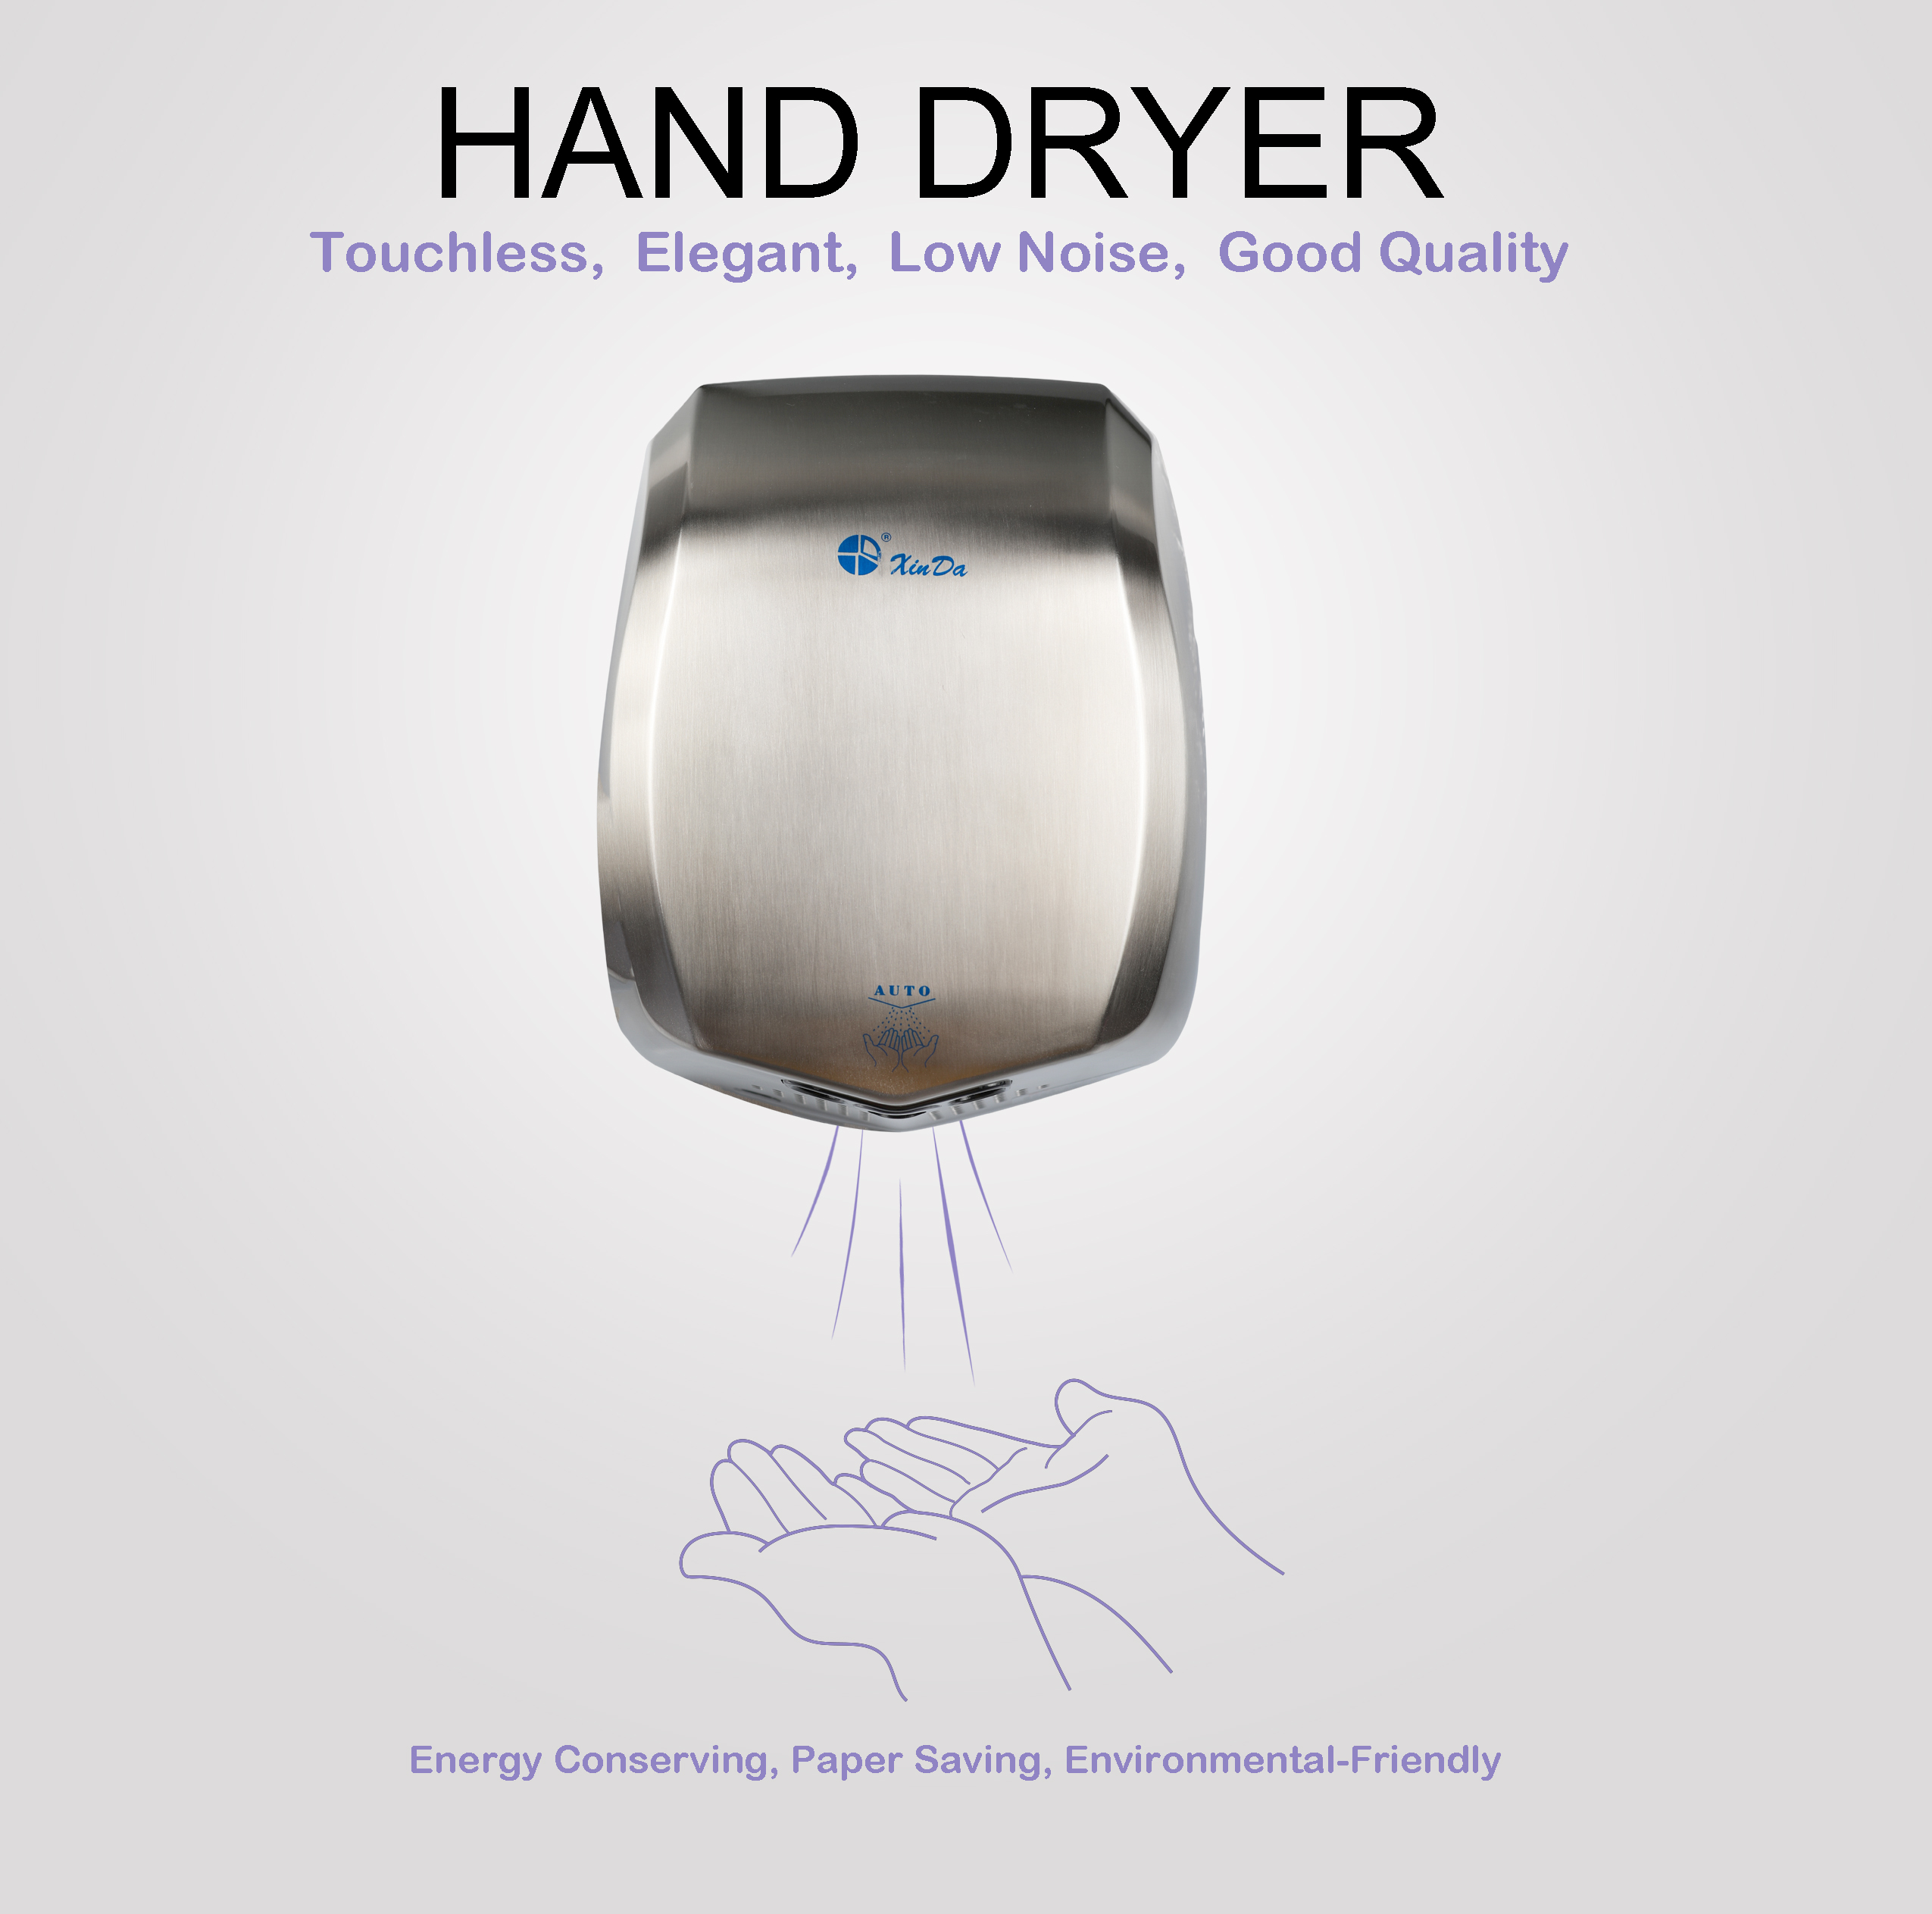 Benefits of an Automatic/Wall Mounted Hand Dryer